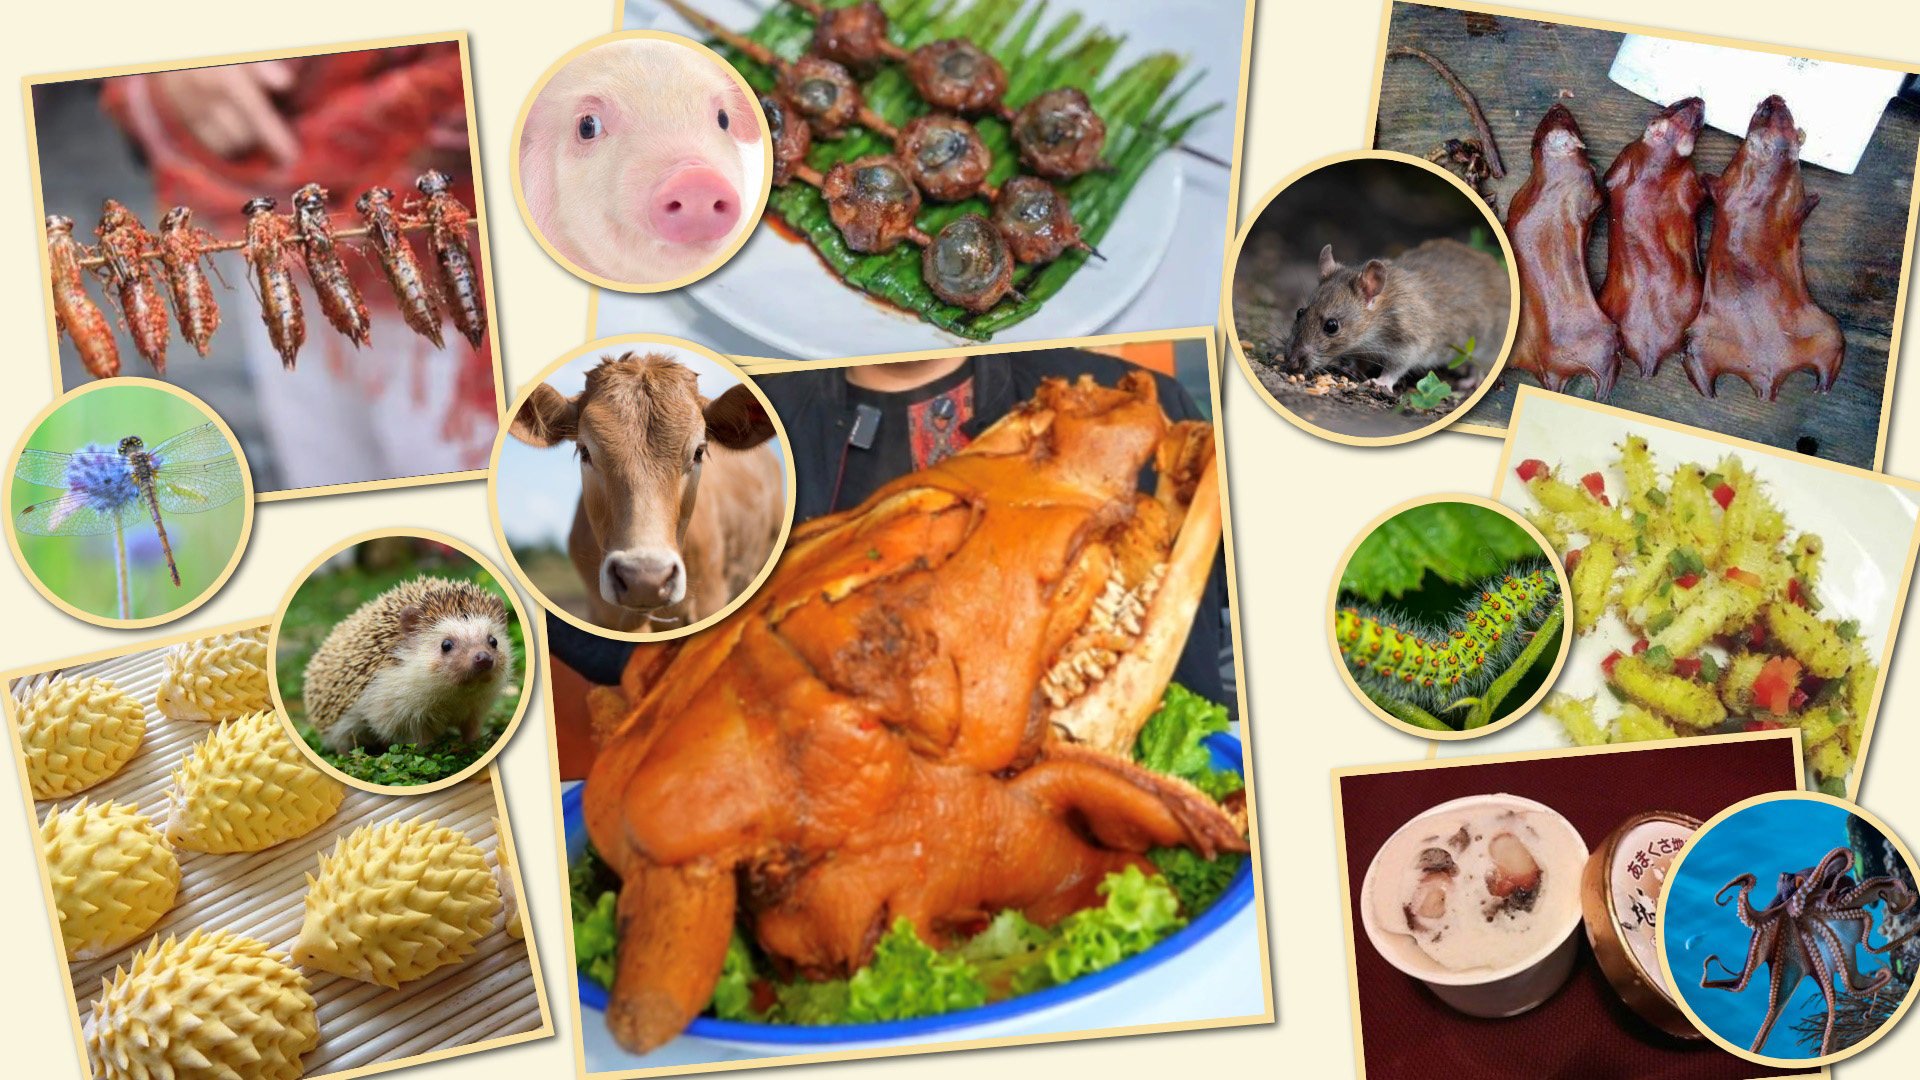 Check out the Post’s tasty-ten list of weird and wonderful dishes from China and Asia. Photo: SCMP composite/Shutterstock/Baidu/Douyin/QQ.com/The Paper